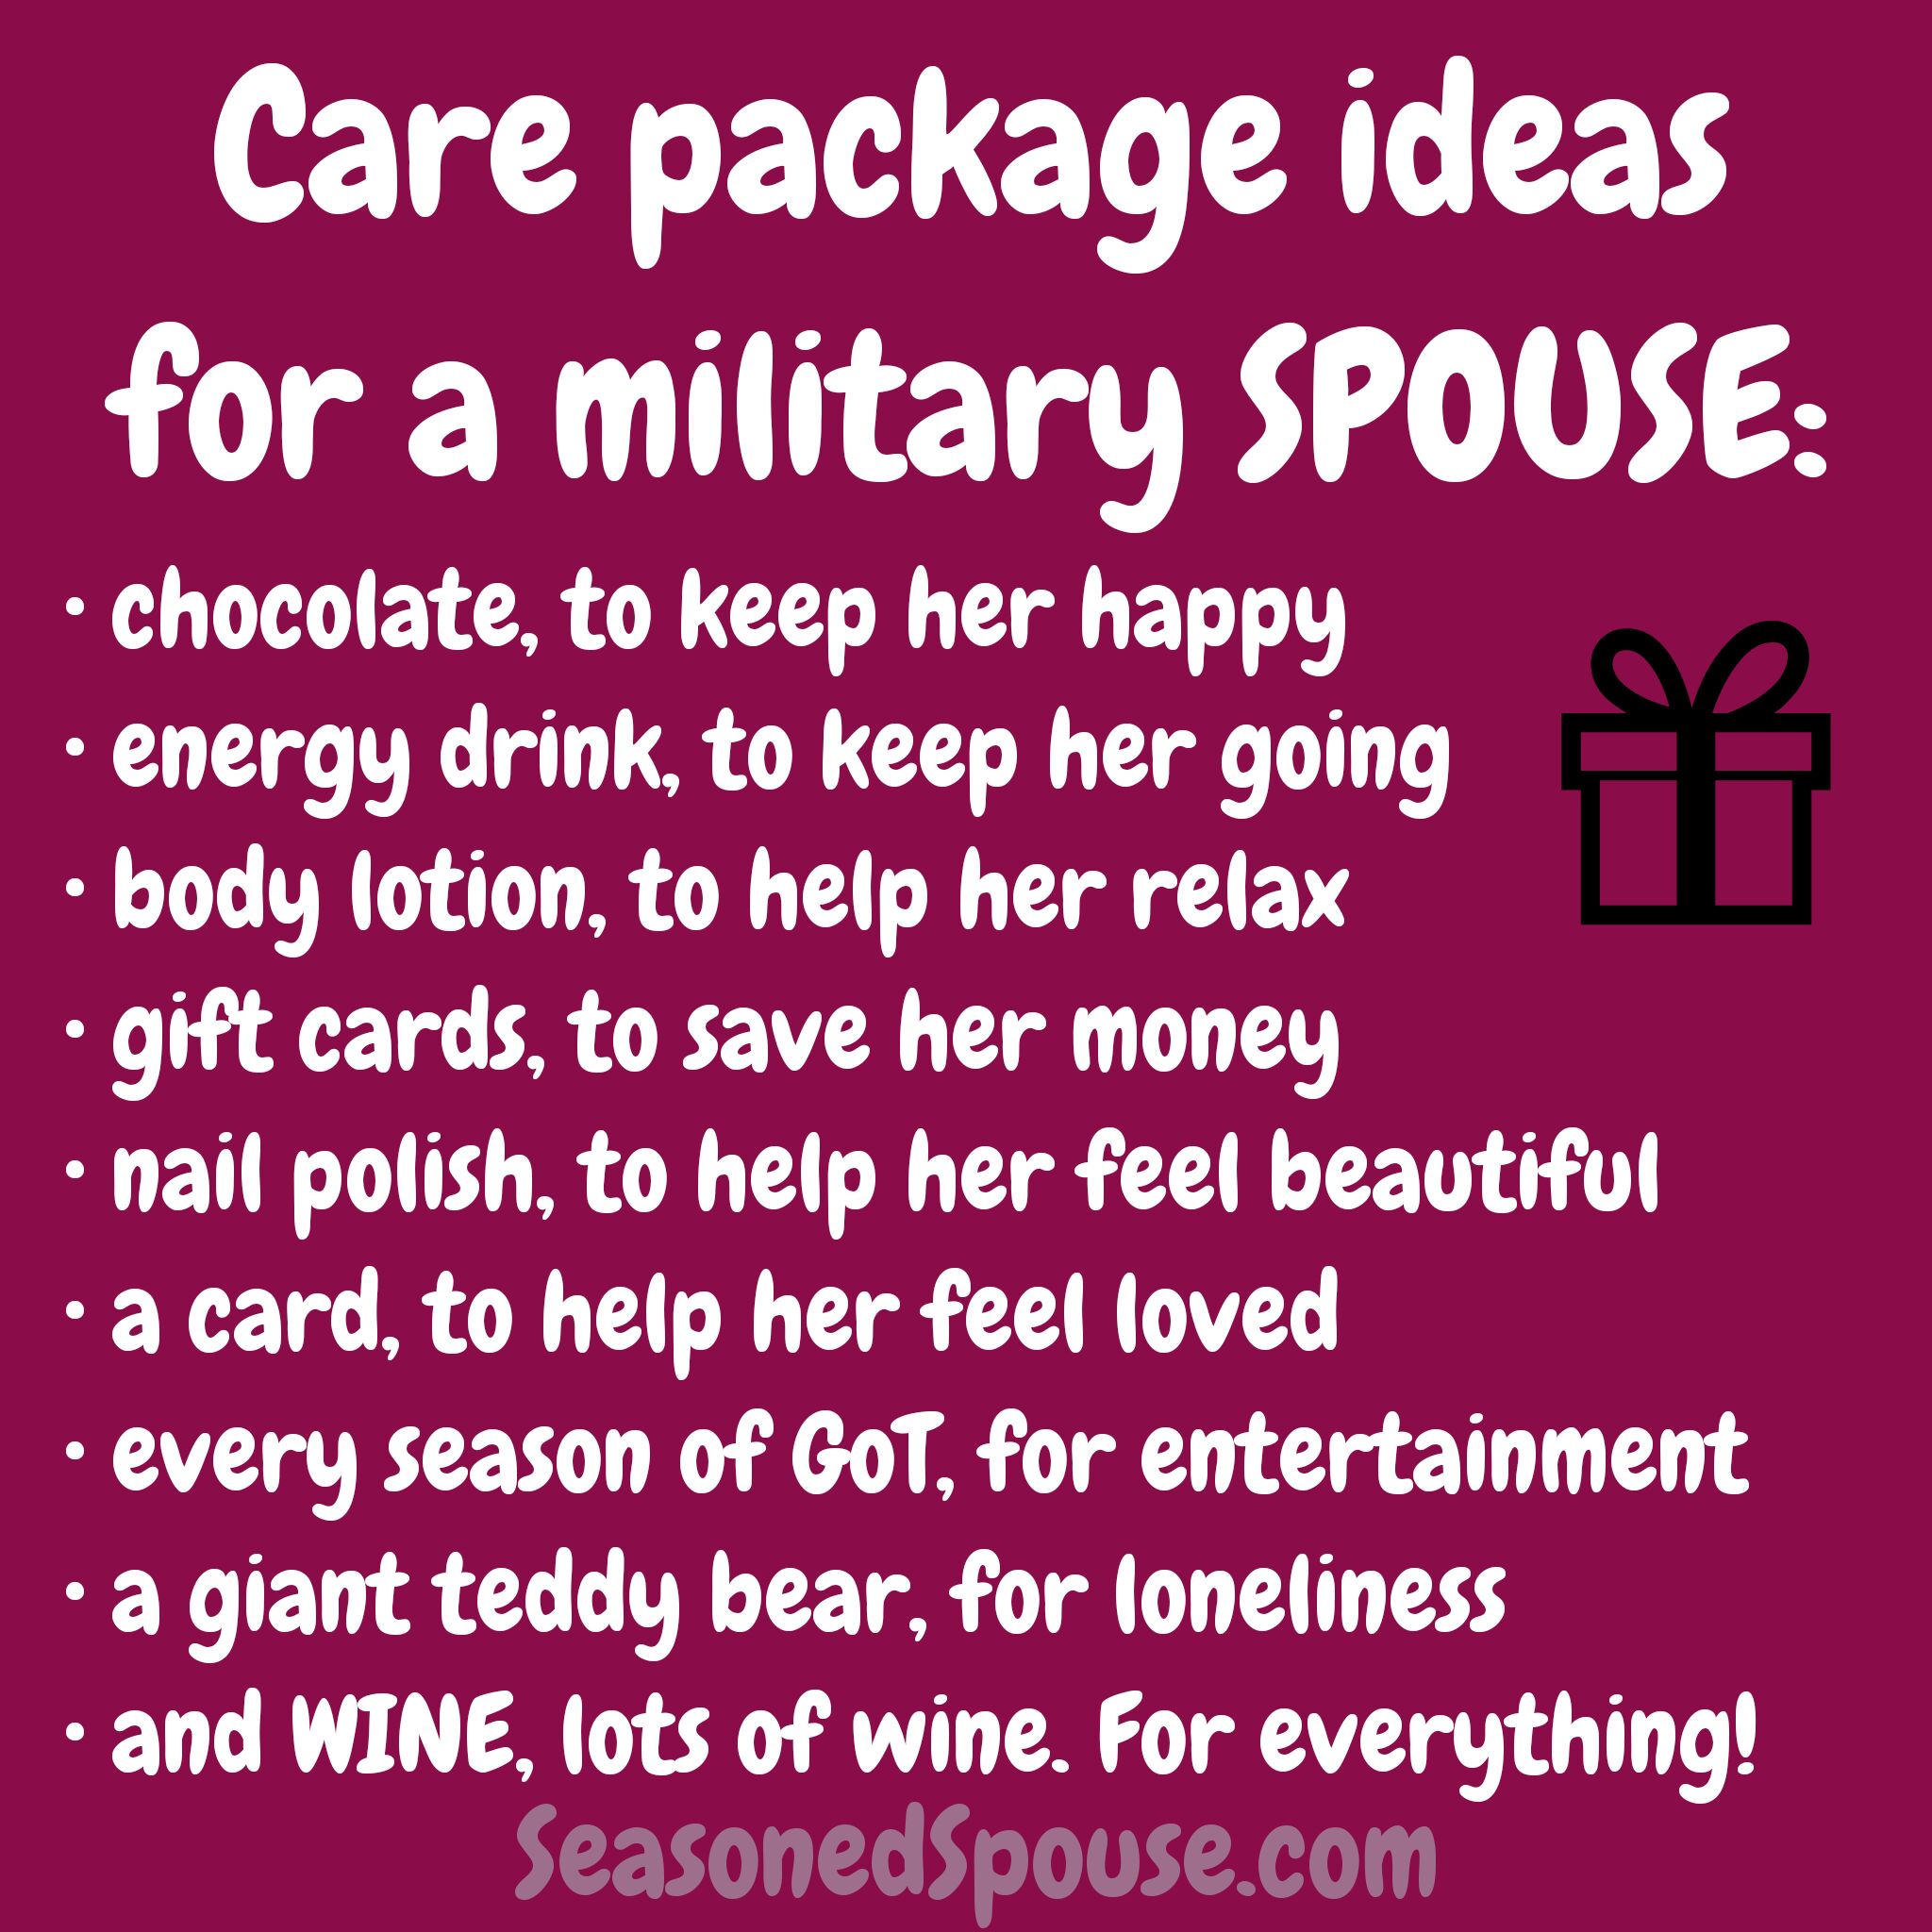 A deployment survival package is for the military spouse who stays on the Homefront. What would a spouse want in her care package?